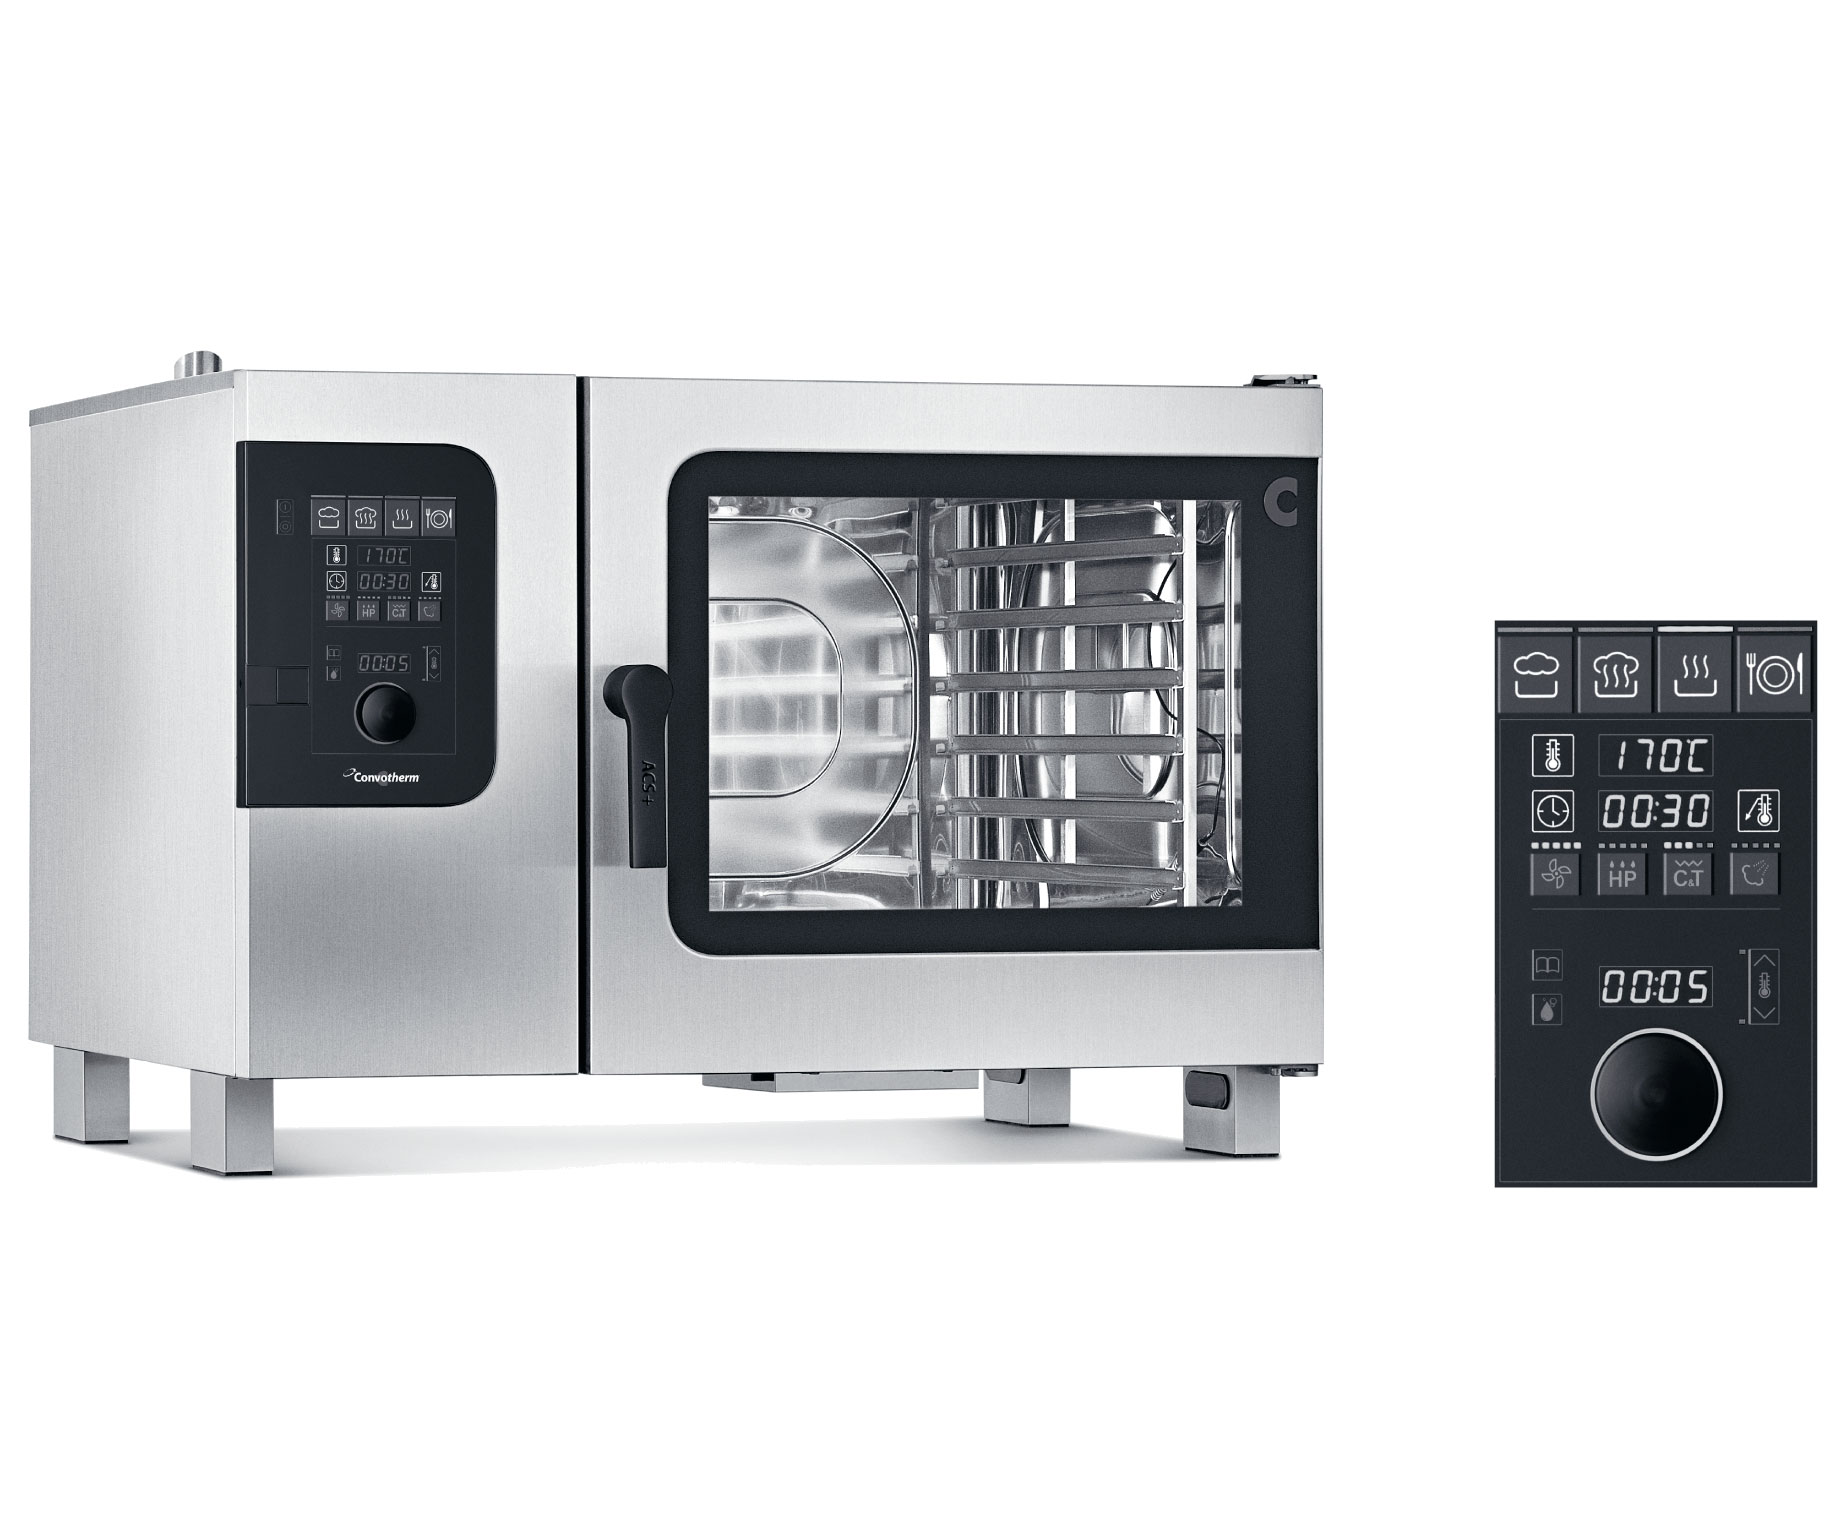 Convotherm C4ED6.20ES RH Full-Size Electric Combi Oven w/ Programmable Controls, Boilerless, 208-240v